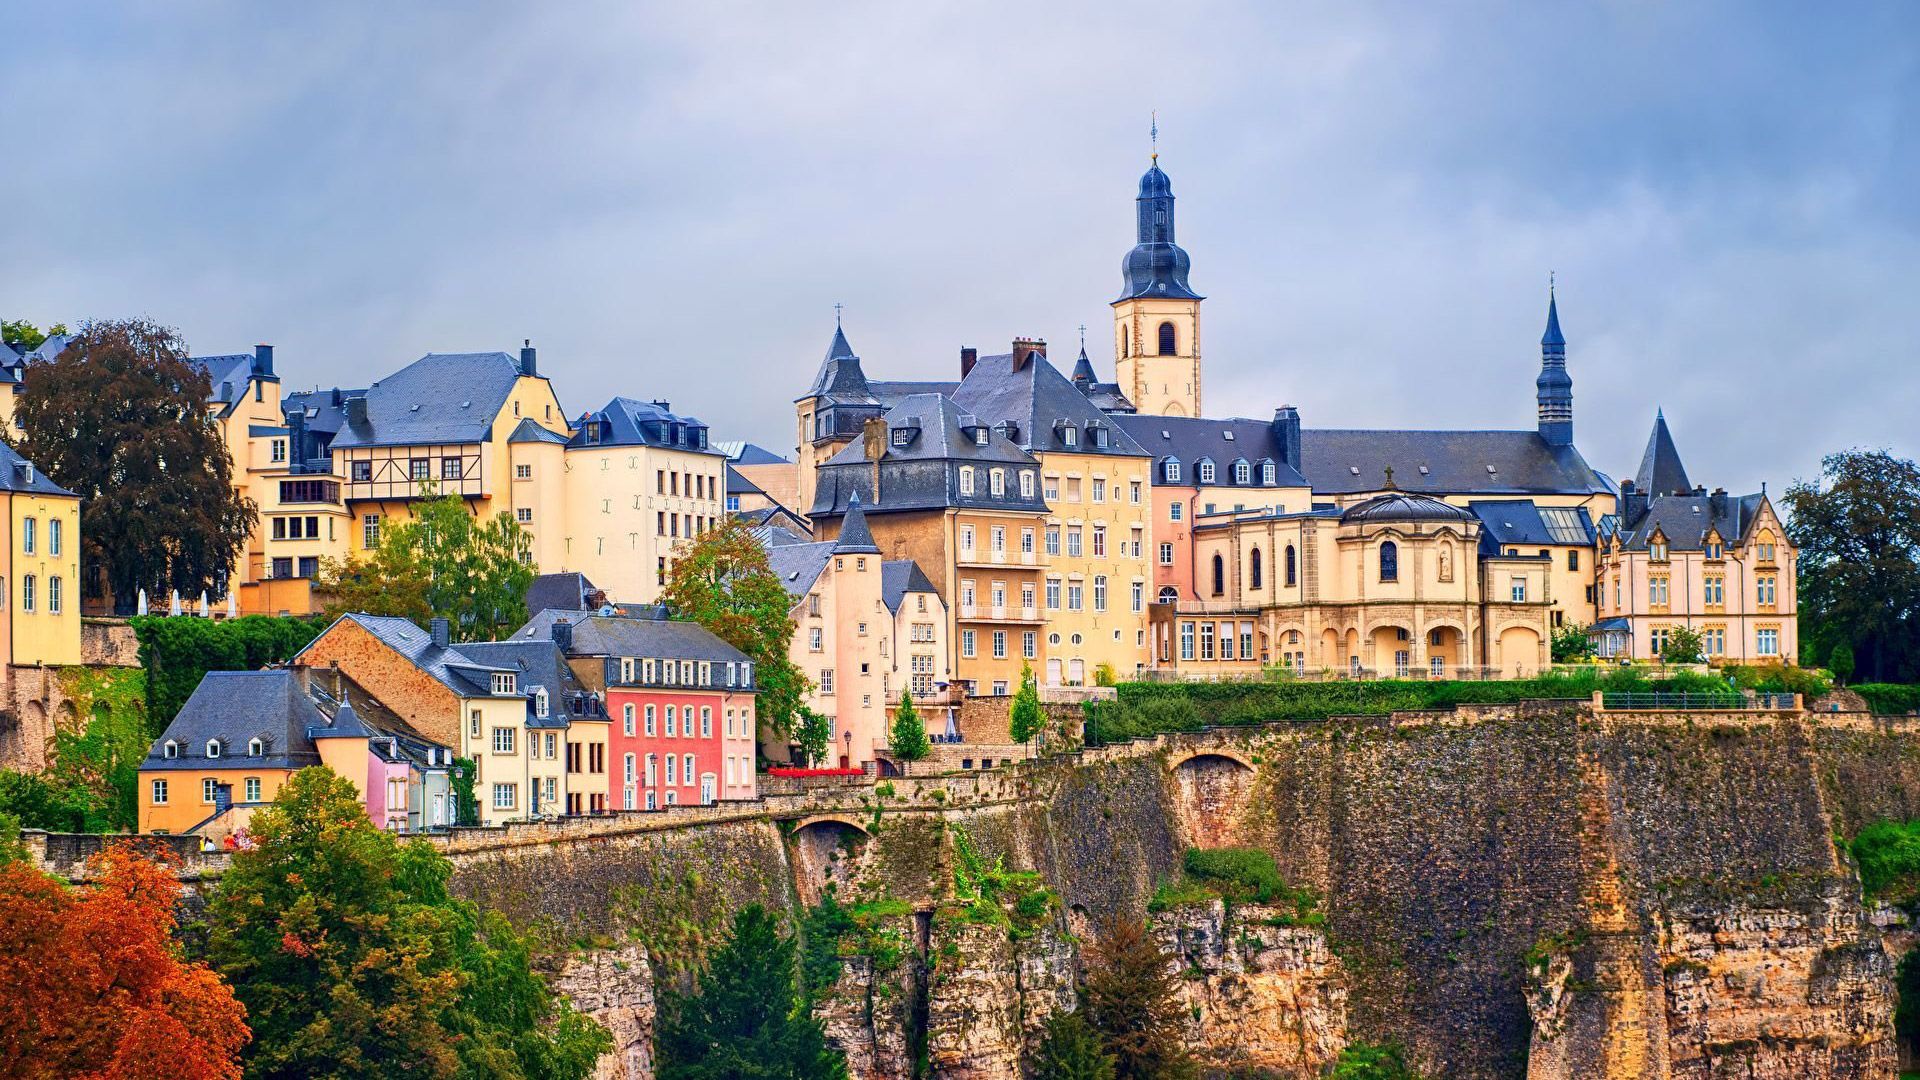 With PayPorter, you can make fast, easy and safe money transfers to Luxembourg at the most affordable prices!